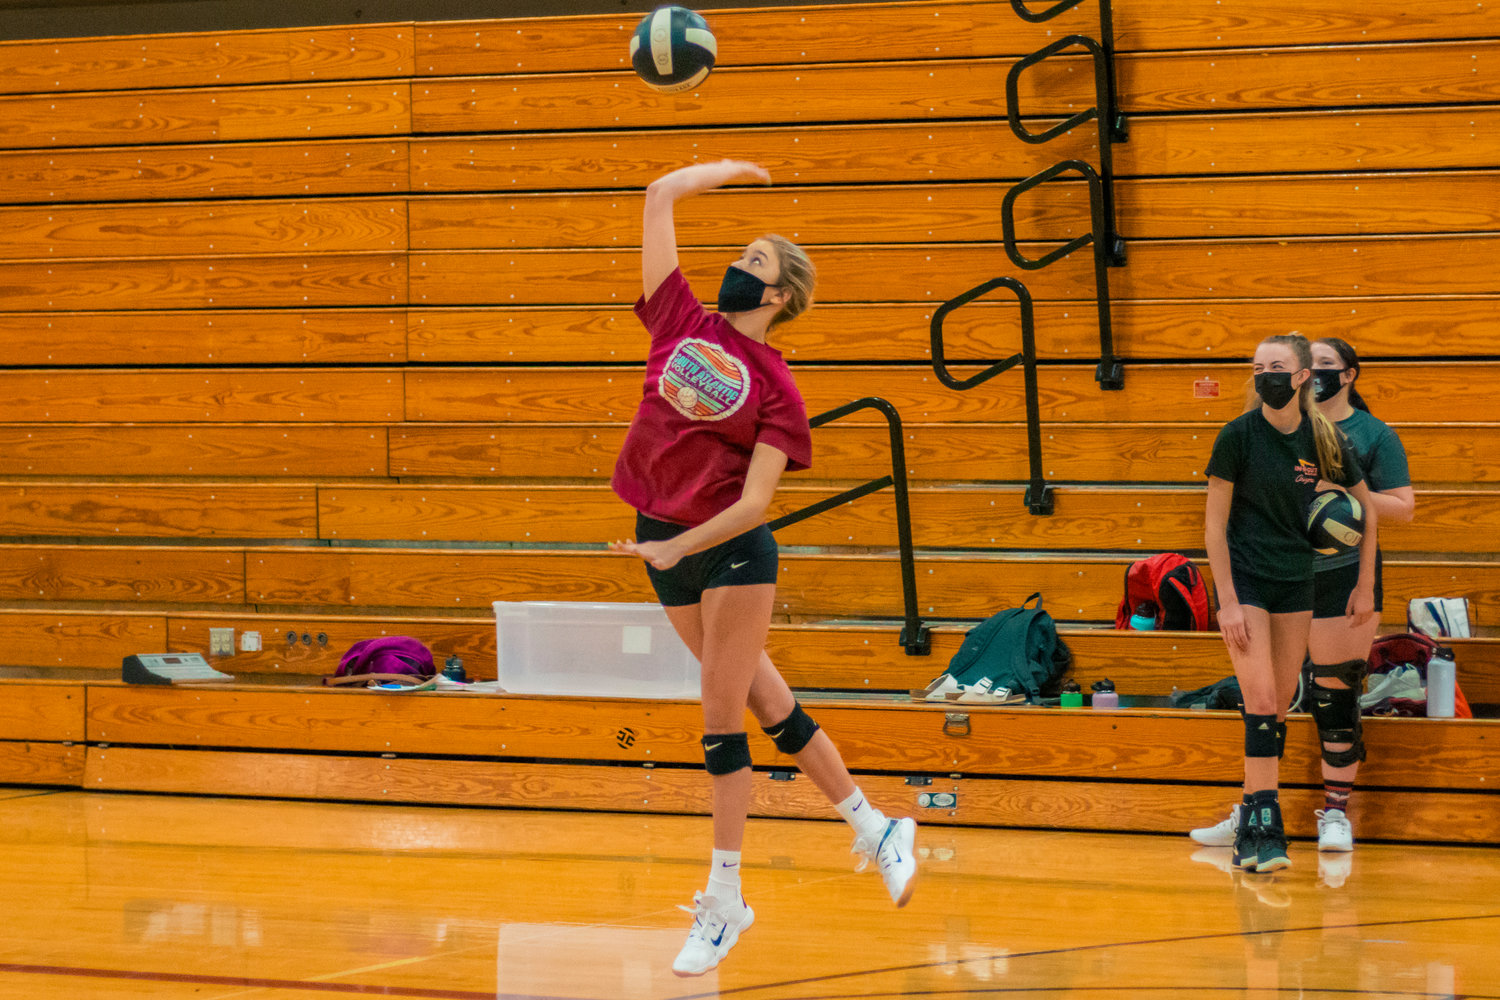 W.F. West's Ava Olsen practices serving Wednesday afternoon in Chehalis.